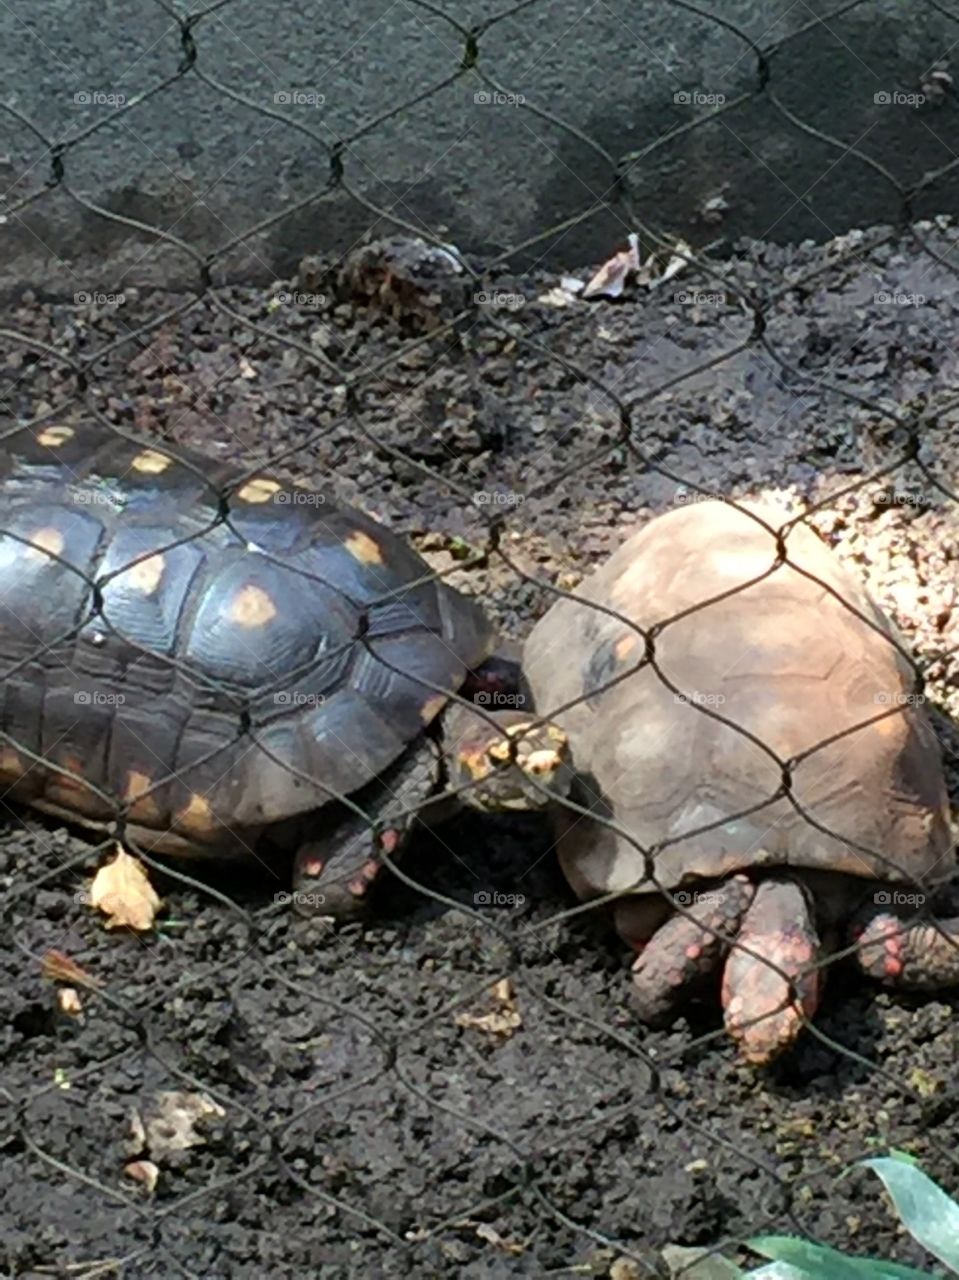 The turtle couple